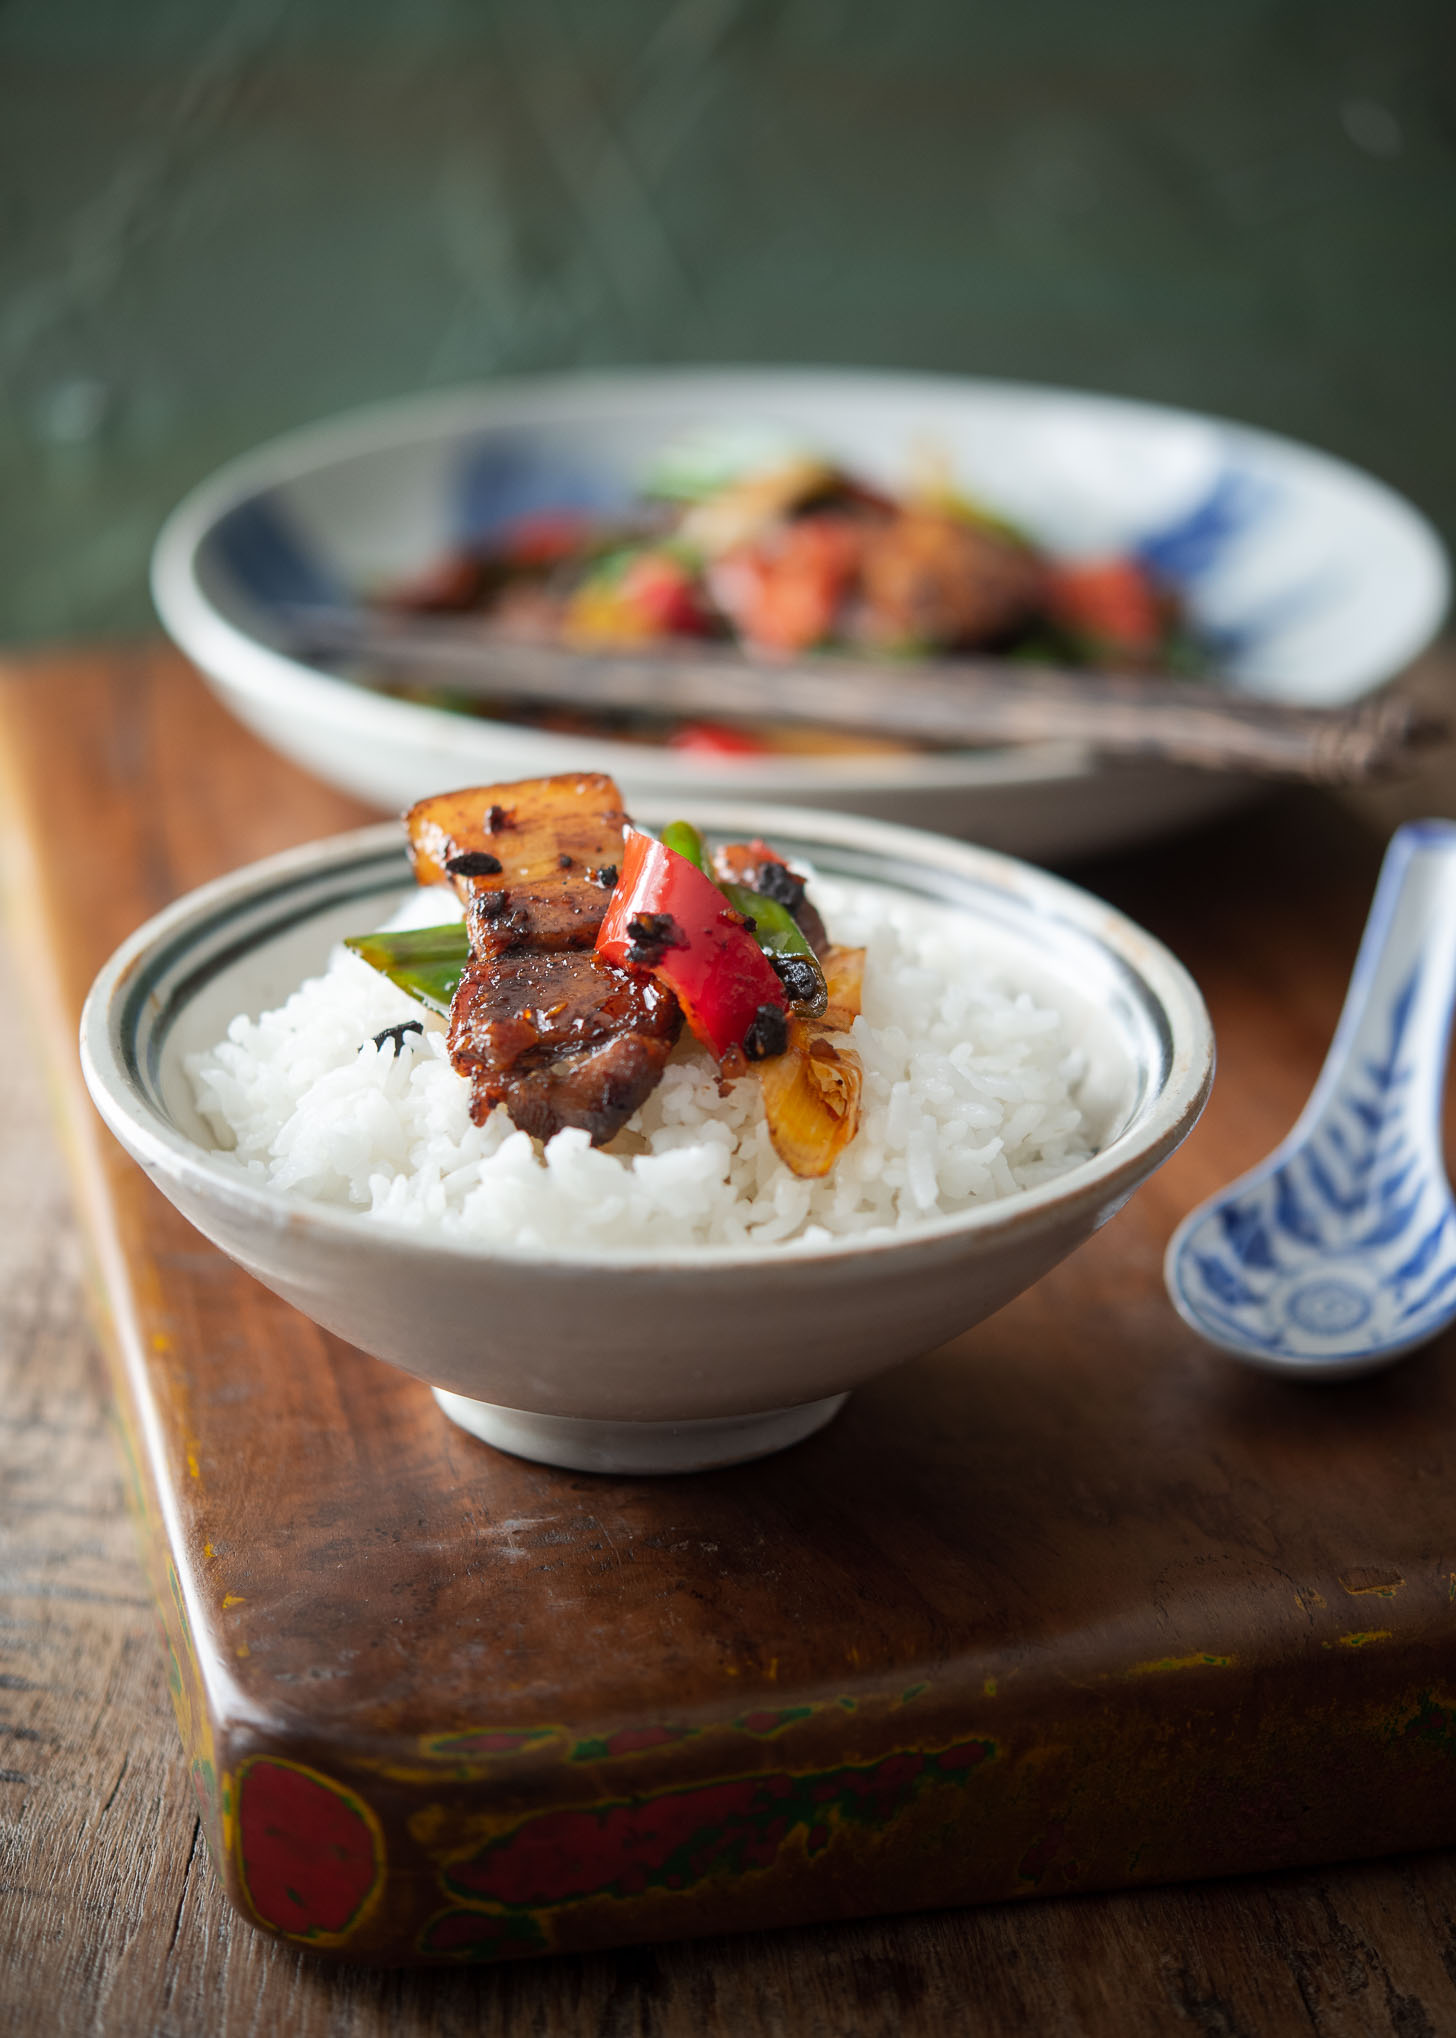 Twice cooked pork is served over a bowl of white rice.